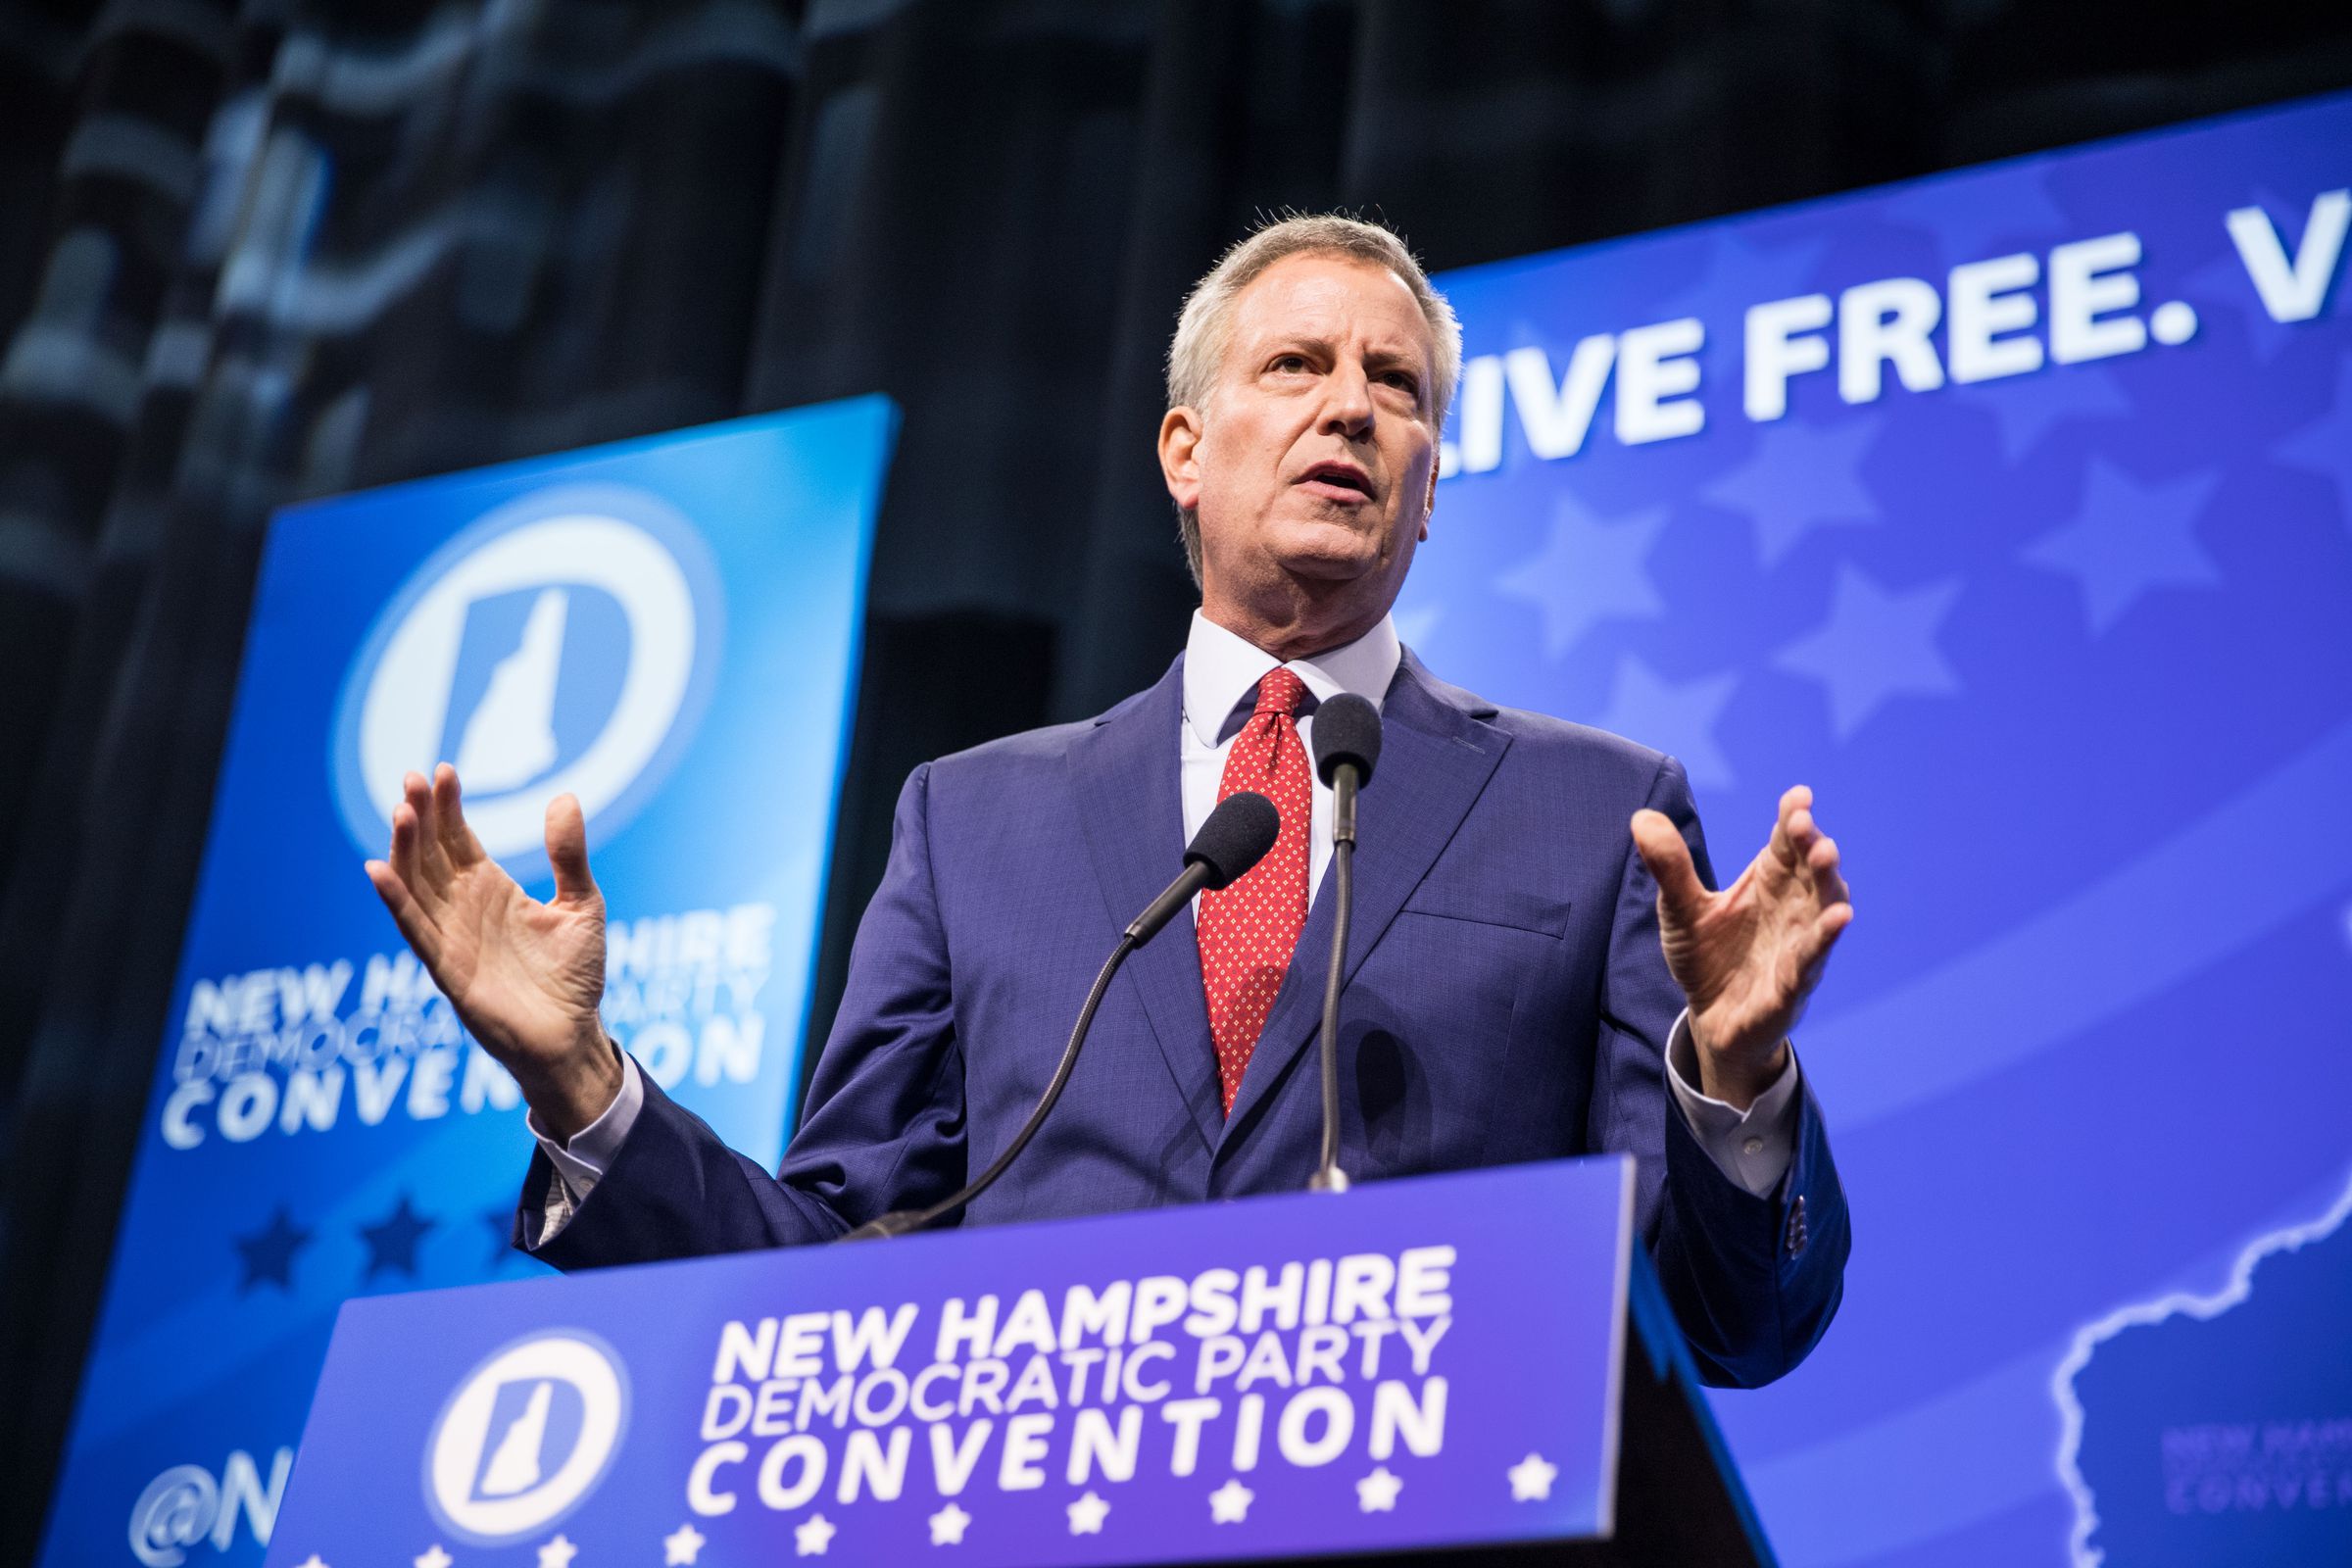 Presidential Candidates Attend New Hampshire Democratic Party Convention